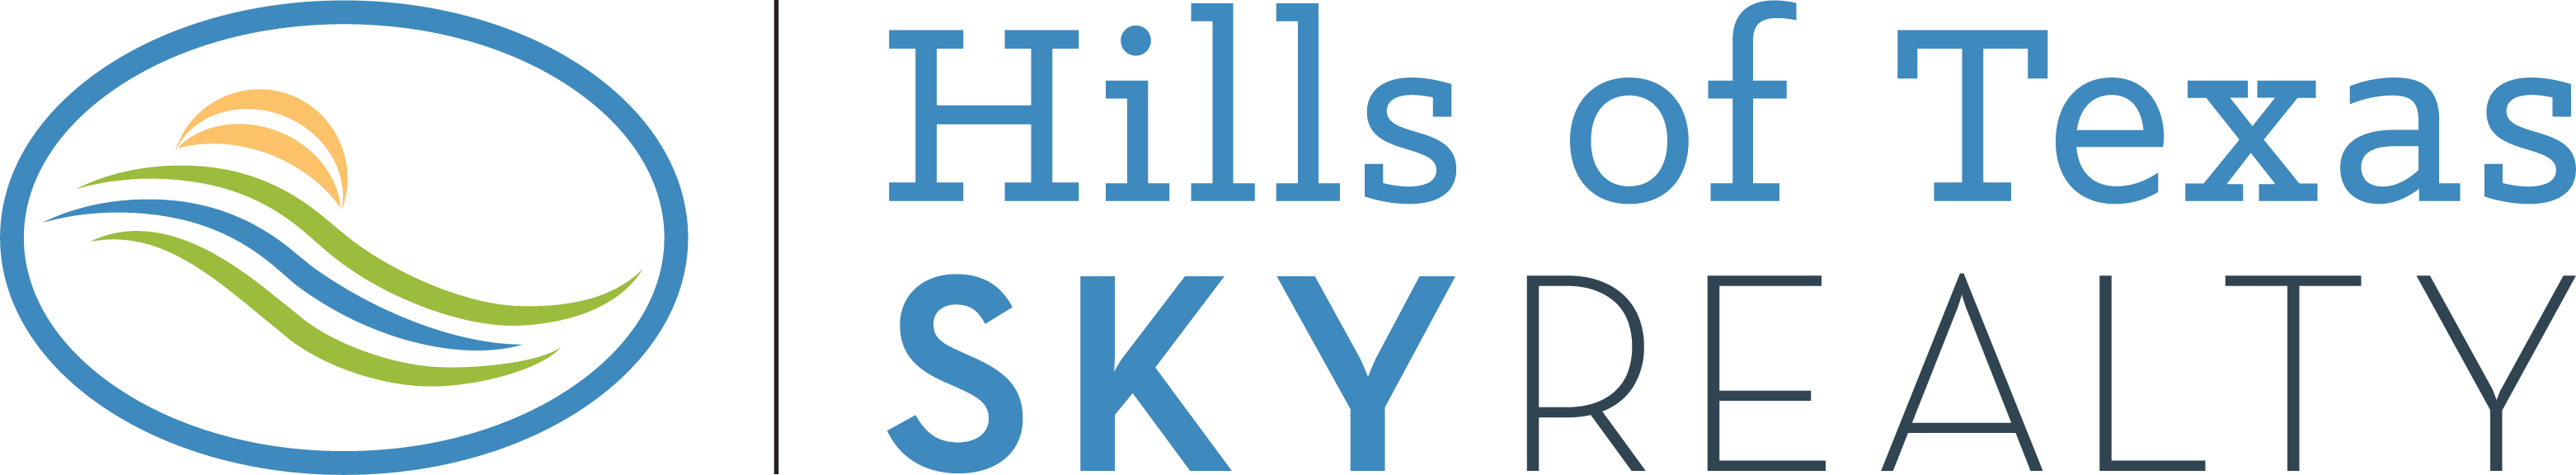 Hills of Texas Sky Realty